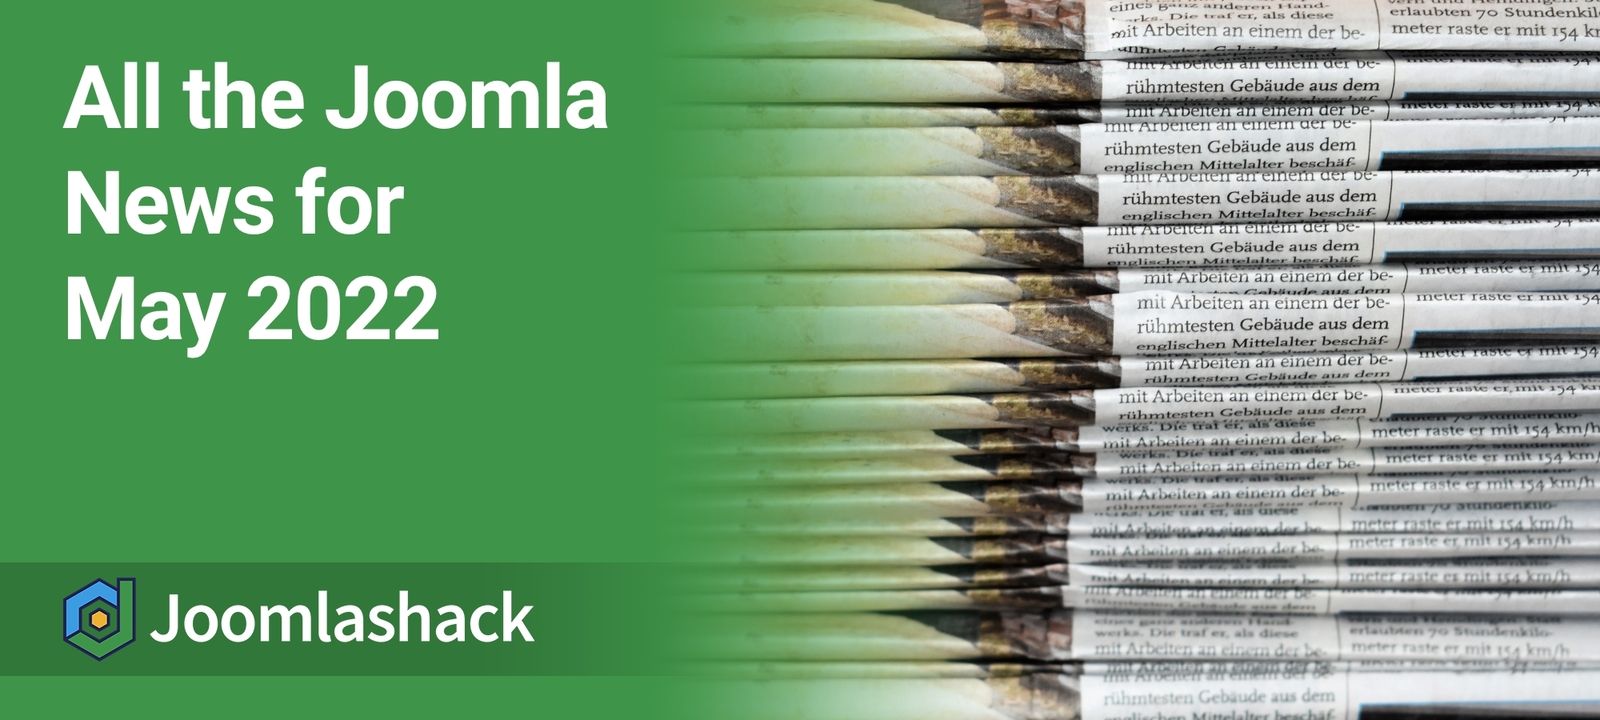 All the Joomla News for May 2022